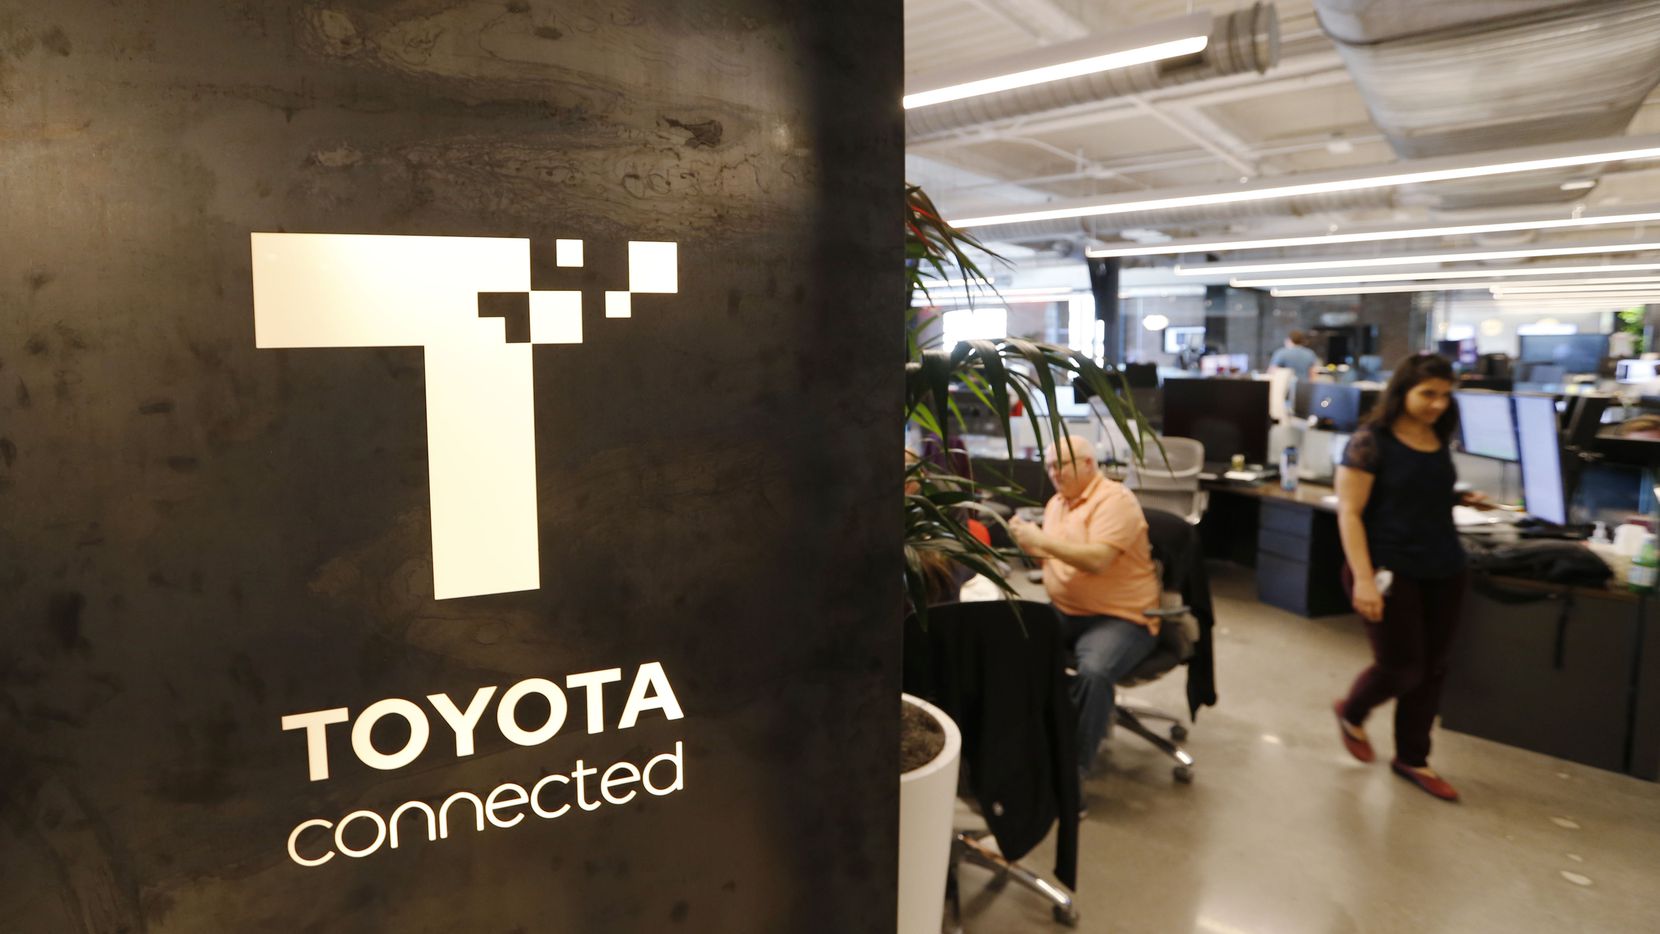 Toyota Connected's office in Legacy West is shown in 2018.